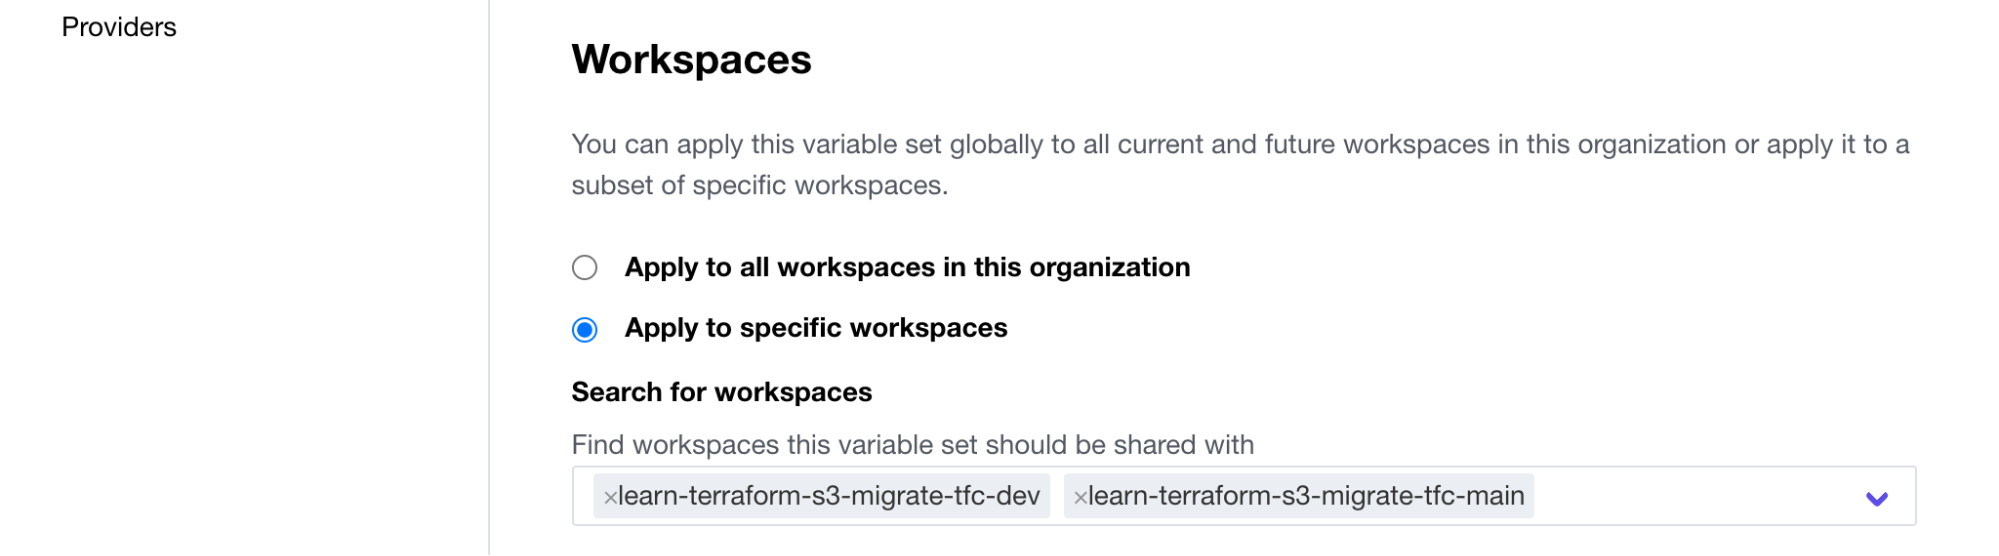 Configure the variable sets to specific workspaces